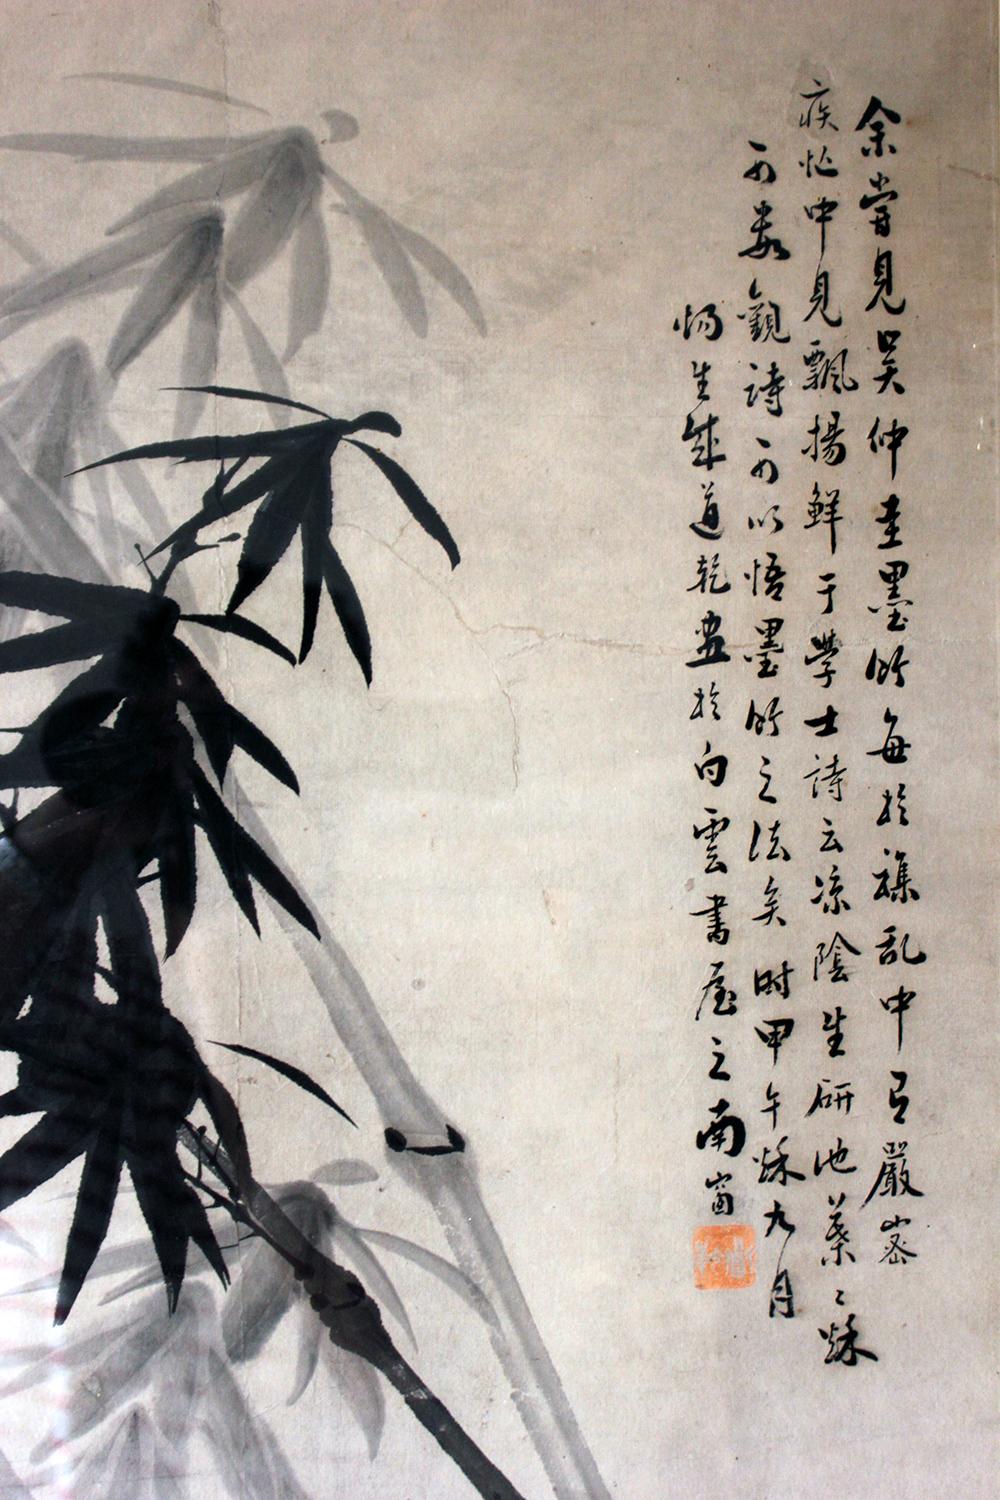 After 董其昌 Dong Qichang, Very Large Chinese Ink Painting of Bamboo, circa 1920-40 6